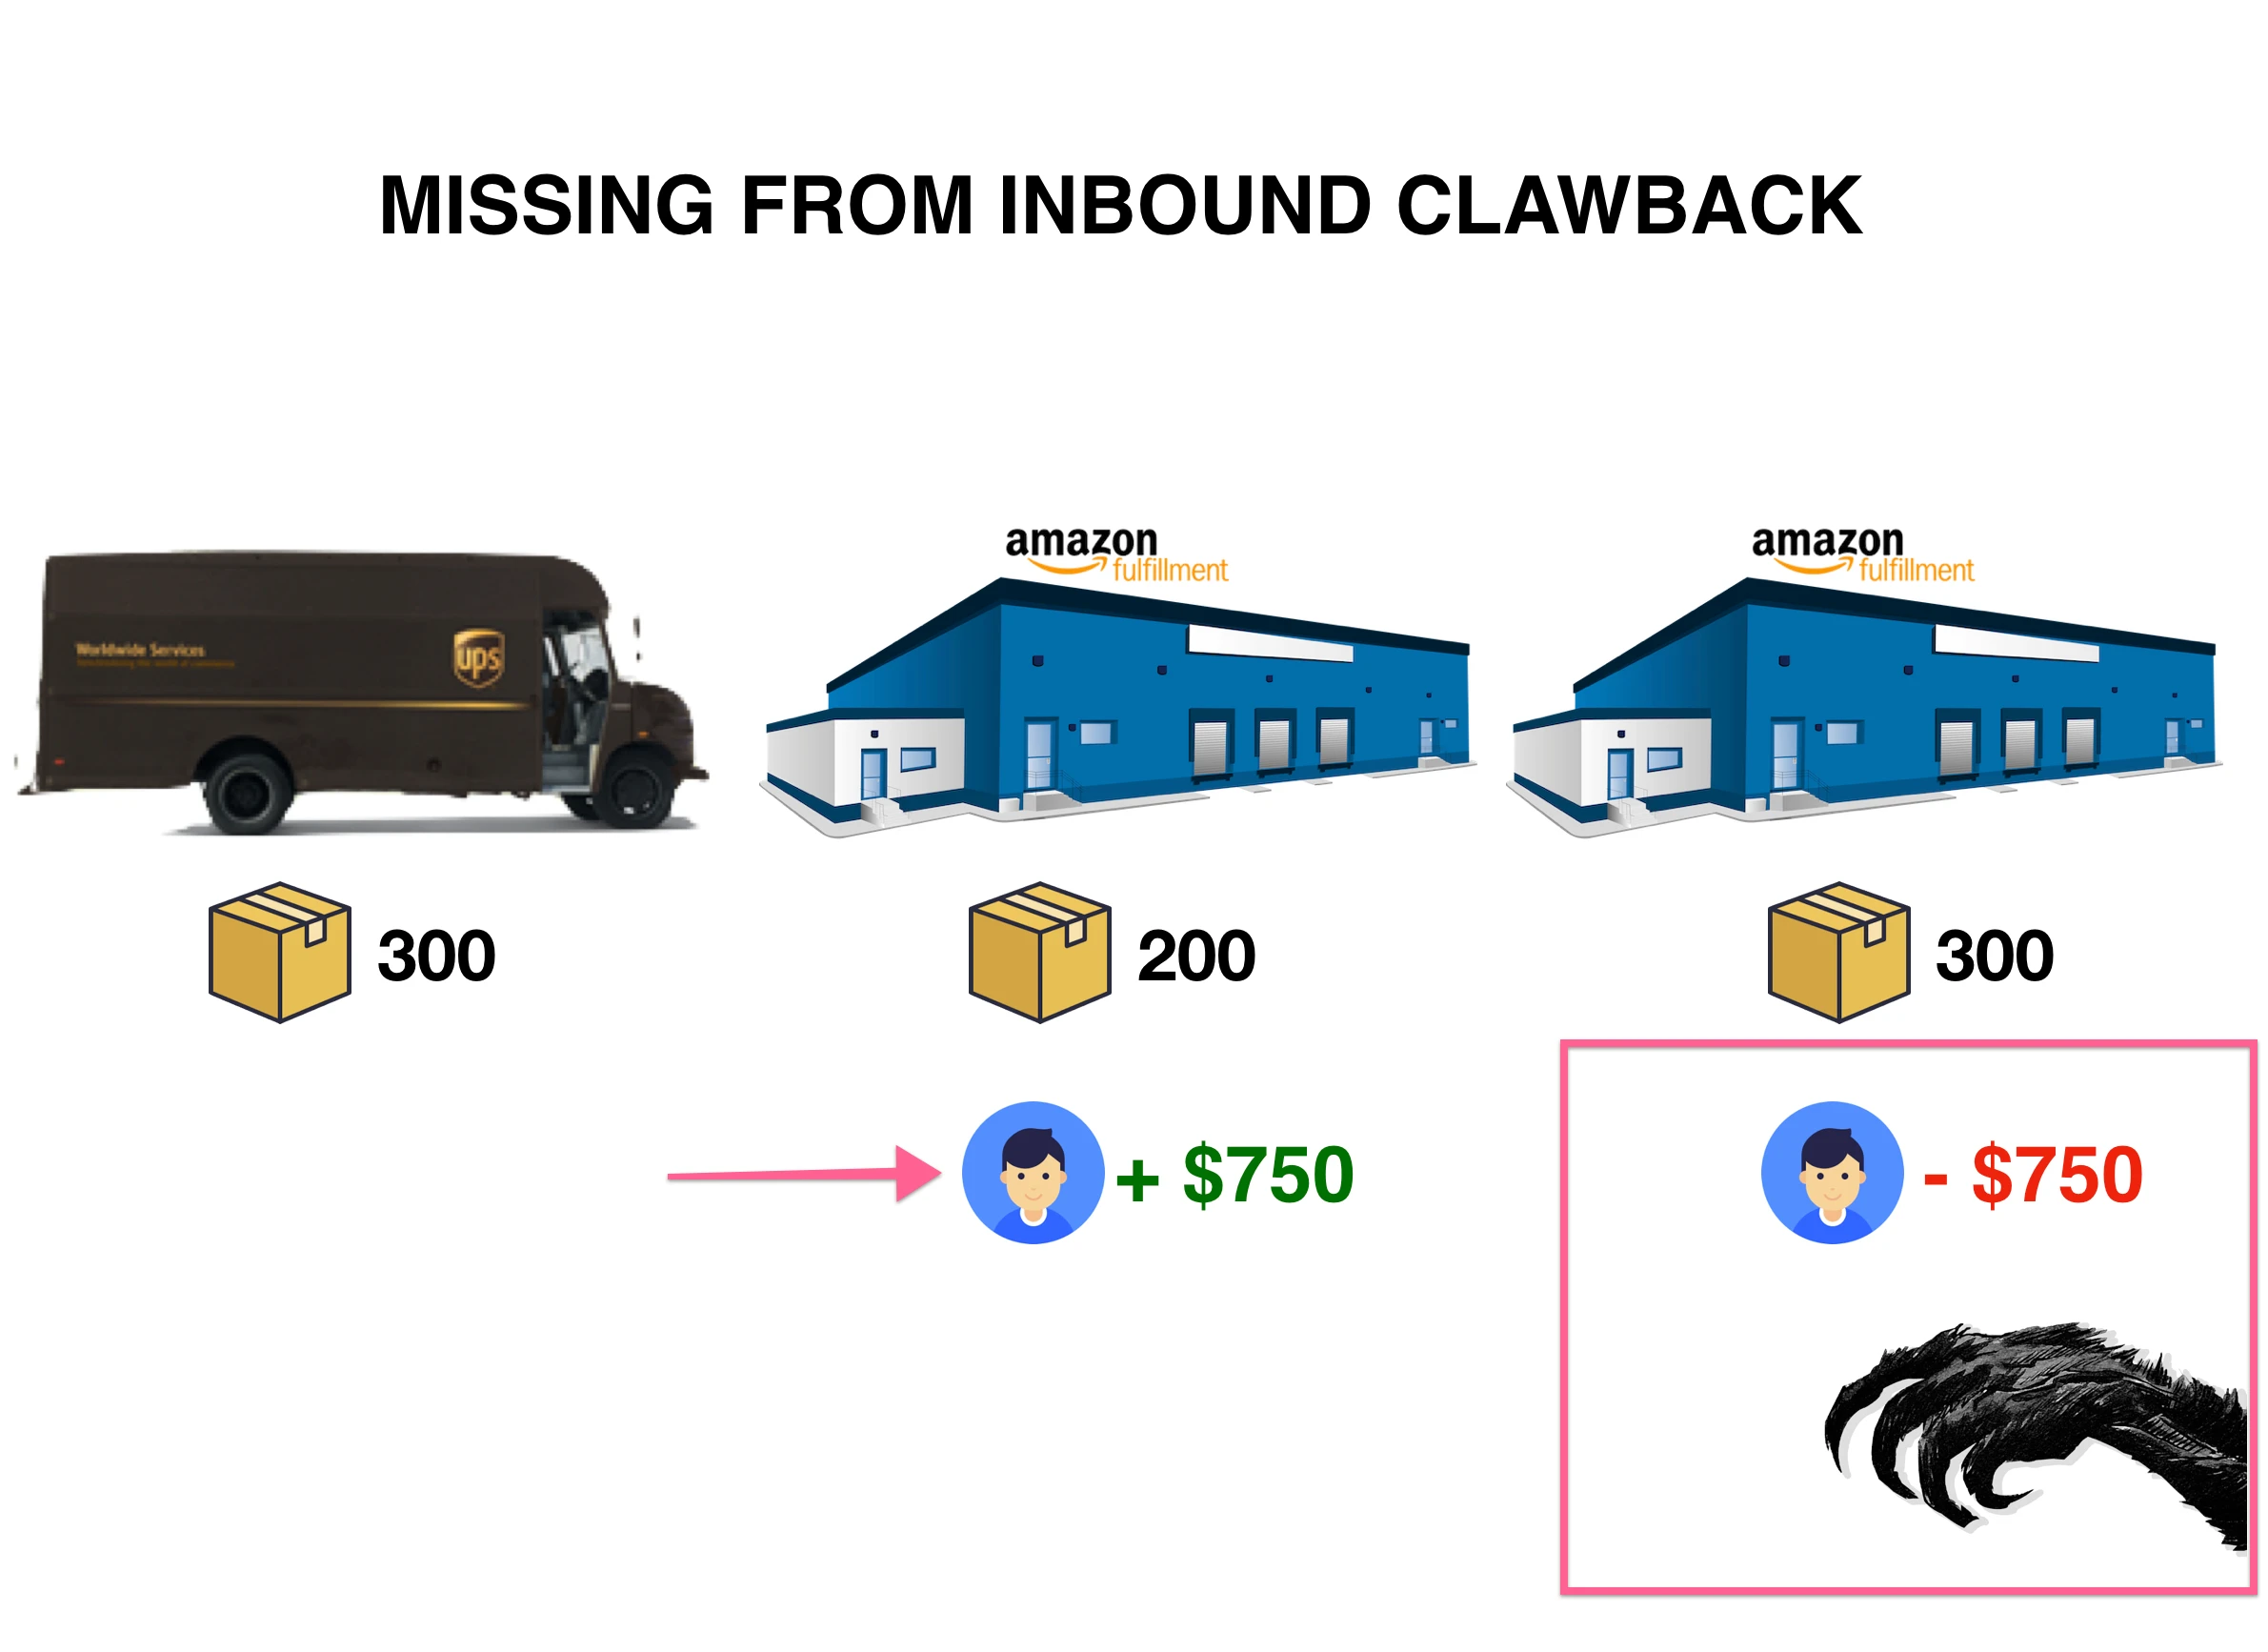 Missing from Inbound Clawback